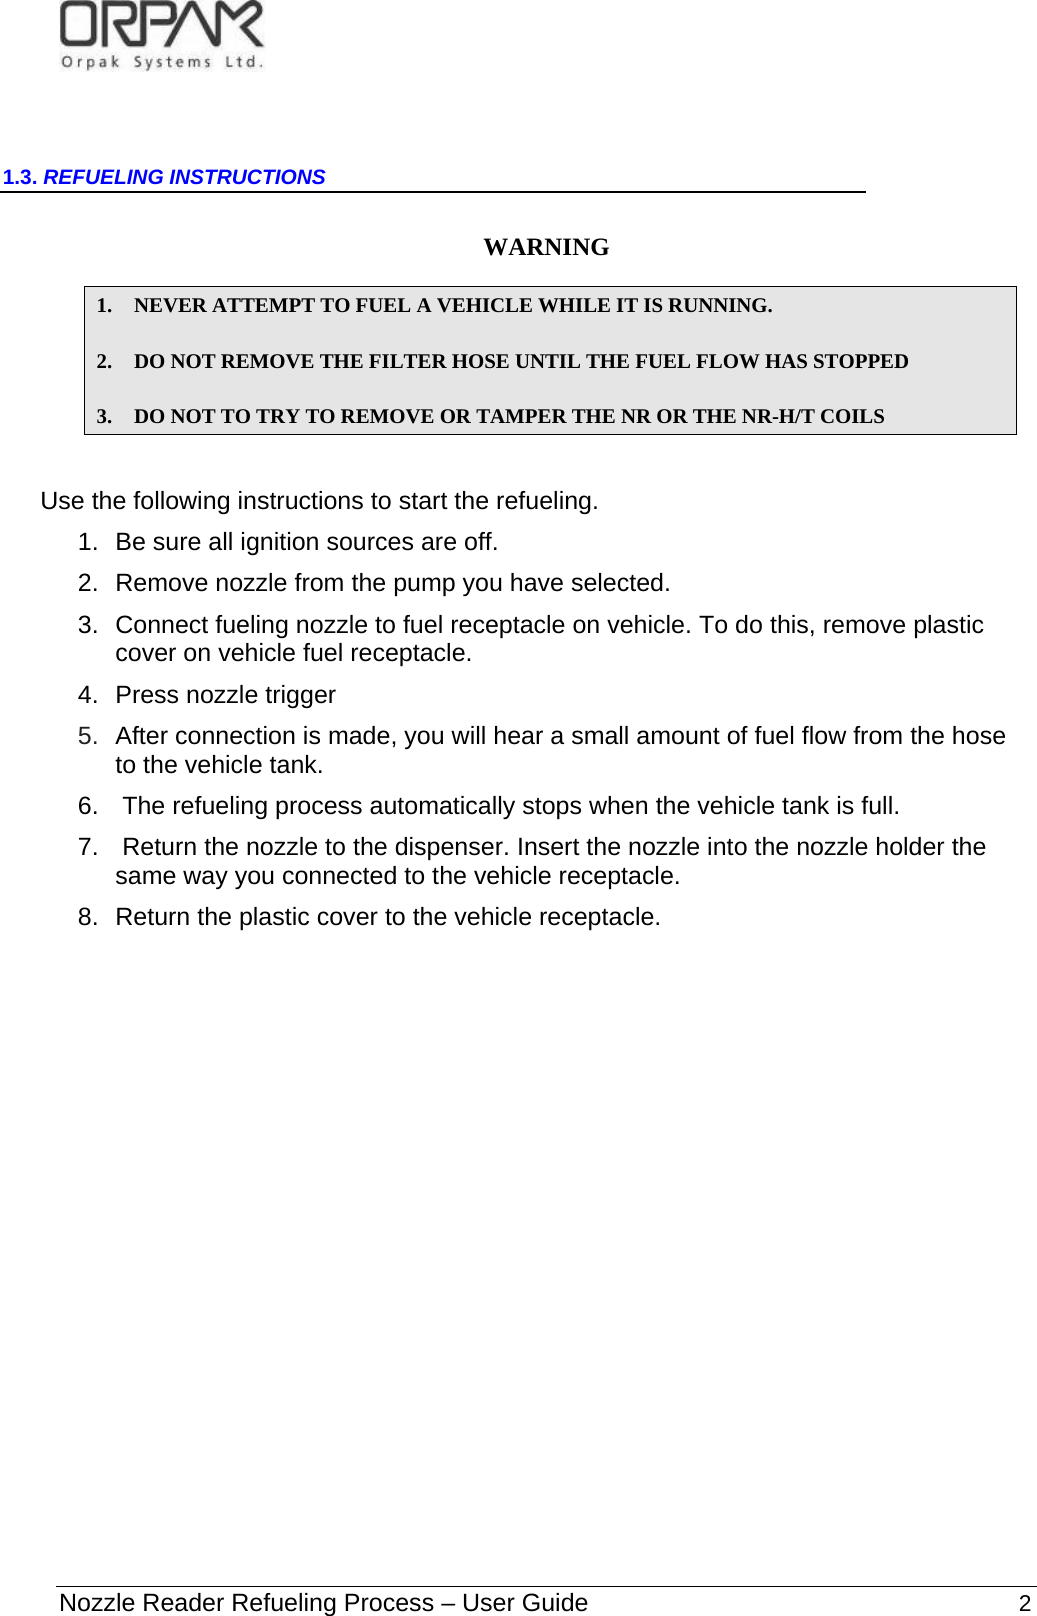   Nozzle Reader Refueling Process – User Guide                                                              2  1.3. REFUELING INSTRUCTIONS  WARNING   1. NEVER ATTEMPT TO FUEL A VEHICLE WHILE IT IS RUNNING.  2. DO NOT REMOVE THE FILTER HOSE UNTIL THE FUEL FLOW HAS STOPPED 3. DO NOT TO TRY TO REMOVE OR TAMPER THE NR OR THE NR-H/T COILS  Use the following instructions to start the refueling. 1.  Be sure all ignition sources are off. 2.  Remove nozzle from the pump you have selected.  3.  Connect fueling nozzle to fuel receptacle on vehicle. To do this, remove plastic cover on vehicle fuel receptacle.   4.  Press nozzle trigger 5.  After connection is made, you will hear a small amount of fuel flow from the hose to the vehicle tank. 6.   The refueling process automatically stops when the vehicle tank is full.   7.   Return the nozzle to the dispenser. Insert the nozzle into the nozzle holder the same way you connected to the vehicle receptacle.   8.  Return the plastic cover to the vehicle receptacle.                